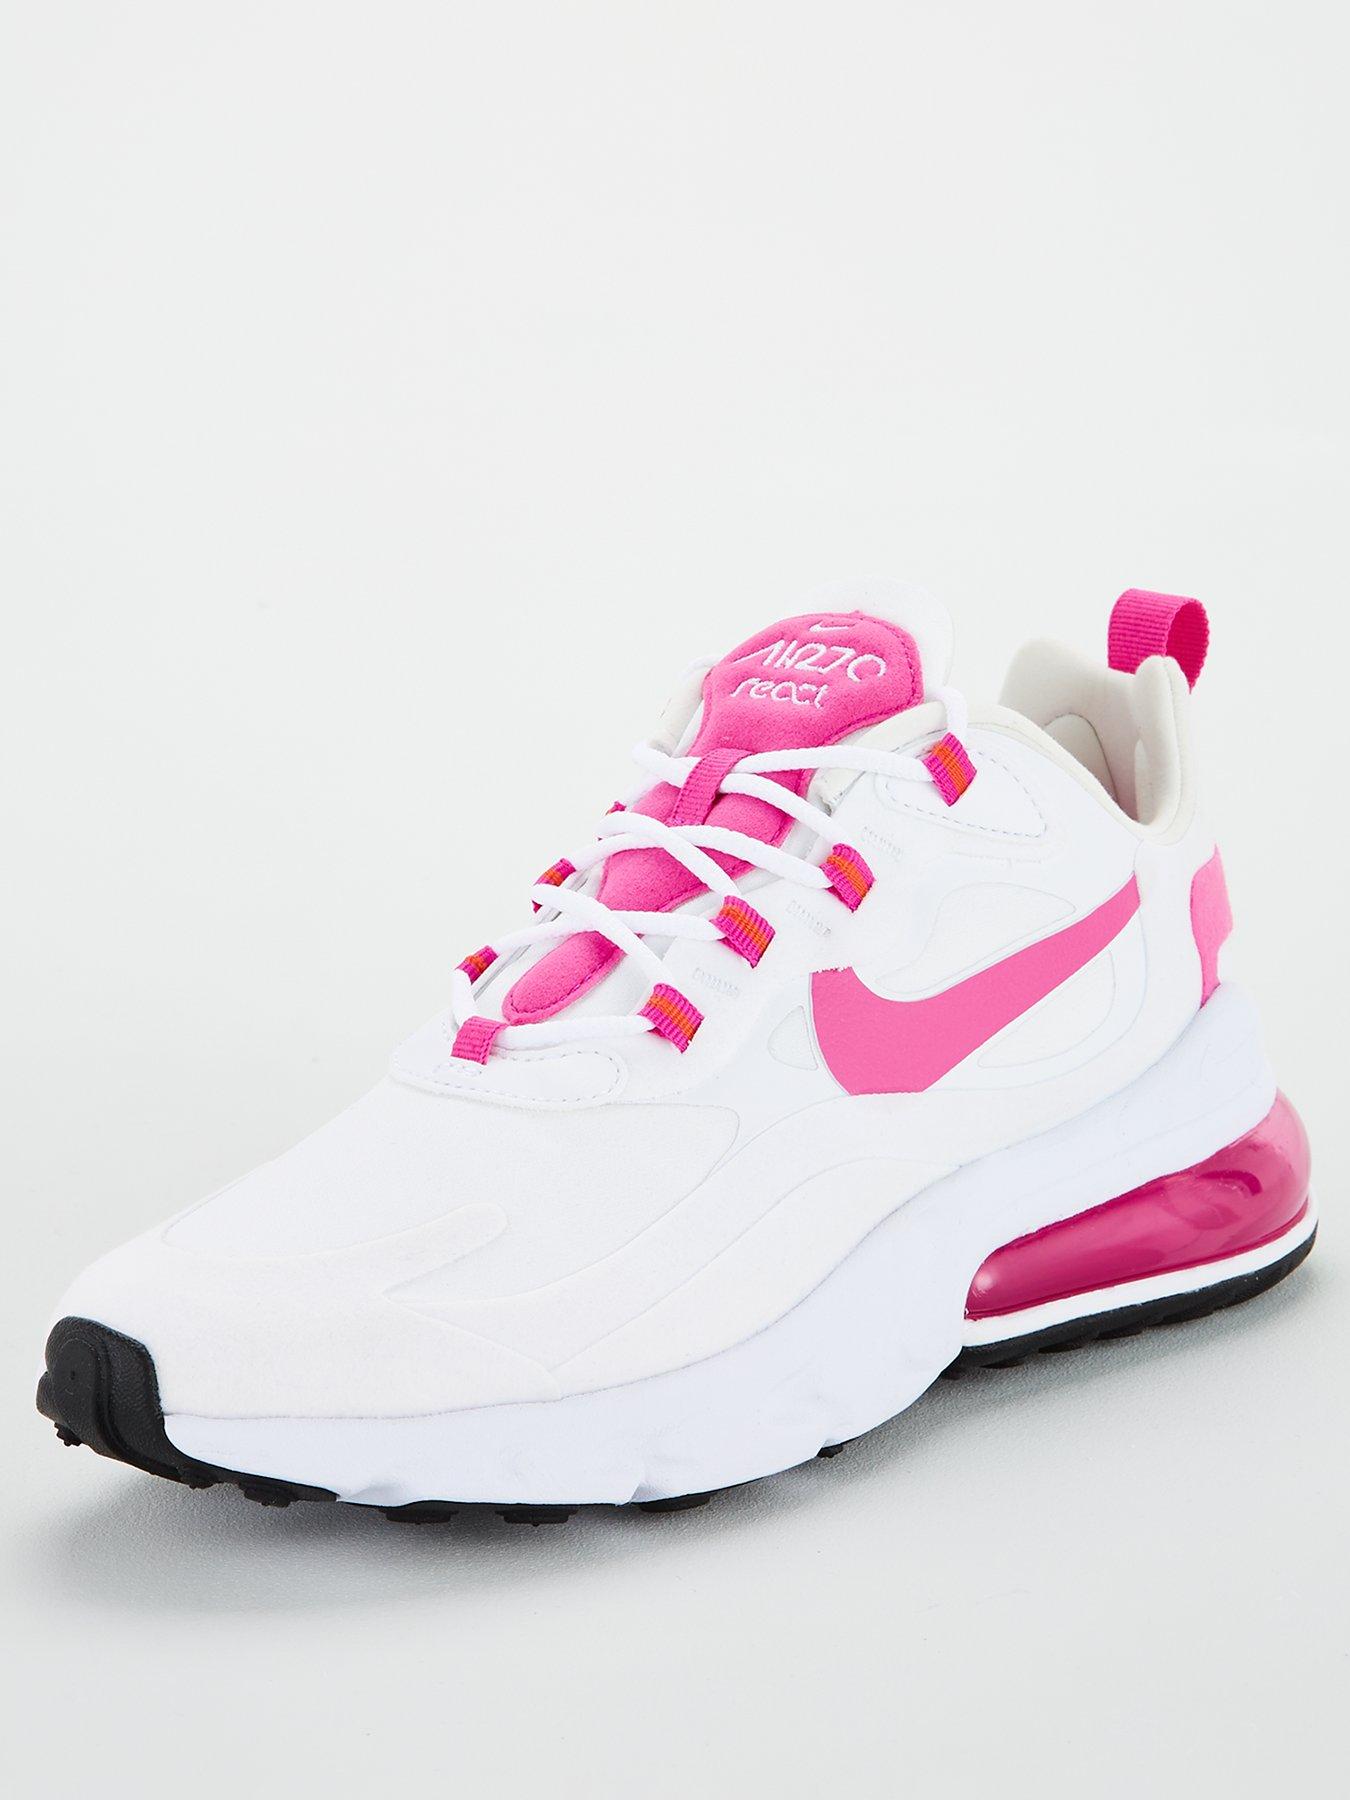 white & pink air max 270 knit trainers